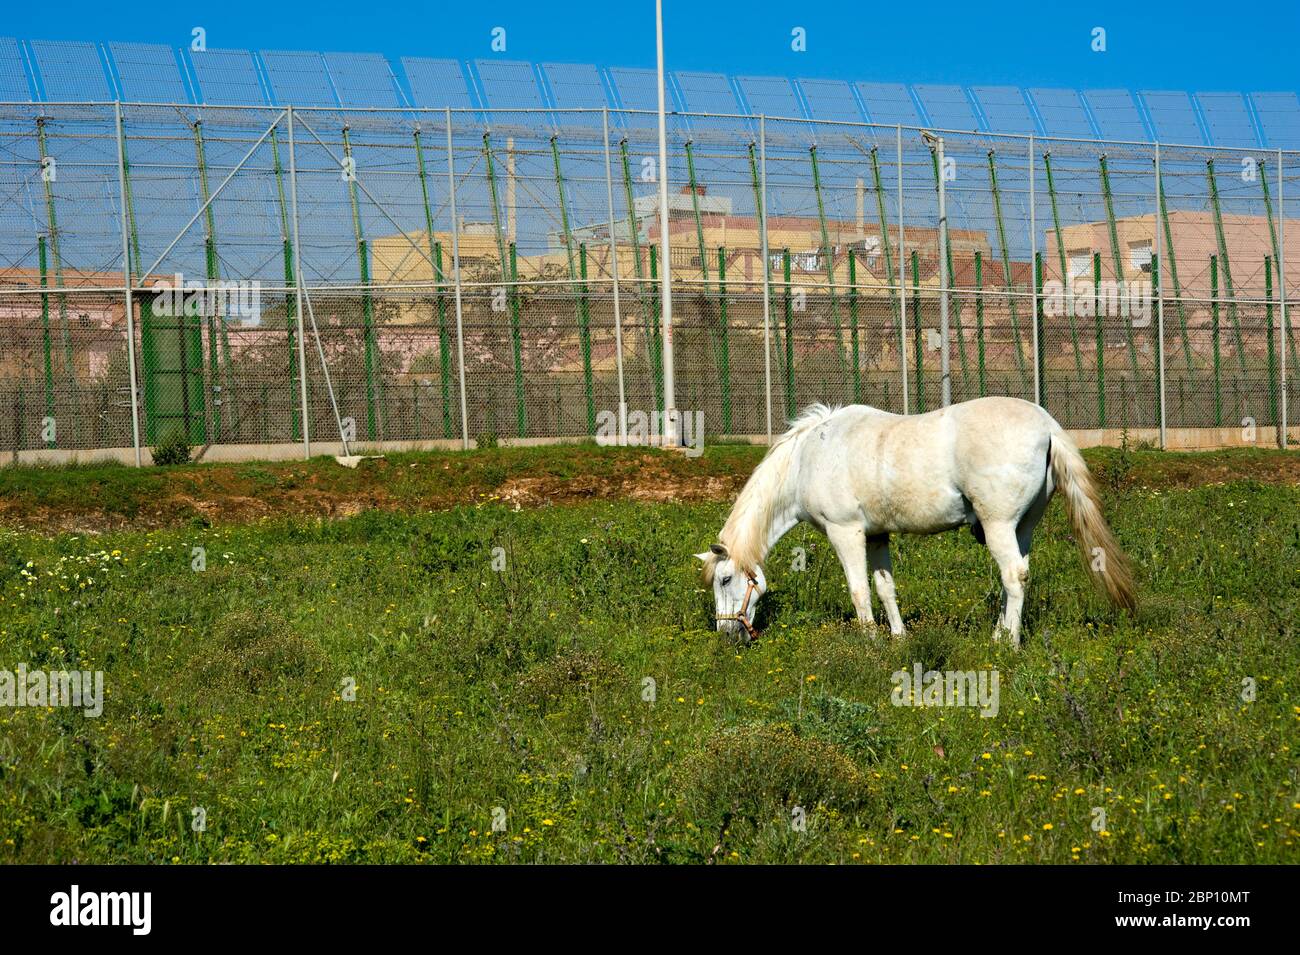 MELILLA,SPAIN-APRIL 19 : Perimeter fence that separates the Spanish enclave of Melilla and Morocco on April 19,2010 in Melilla, Spain. The fence which marks the border around the Spanish enclave in northern Morocco was build to discourage illegal immigrants from attempting to enter to Melilla.  ( Photo by Jordi Cami) Stock Photo